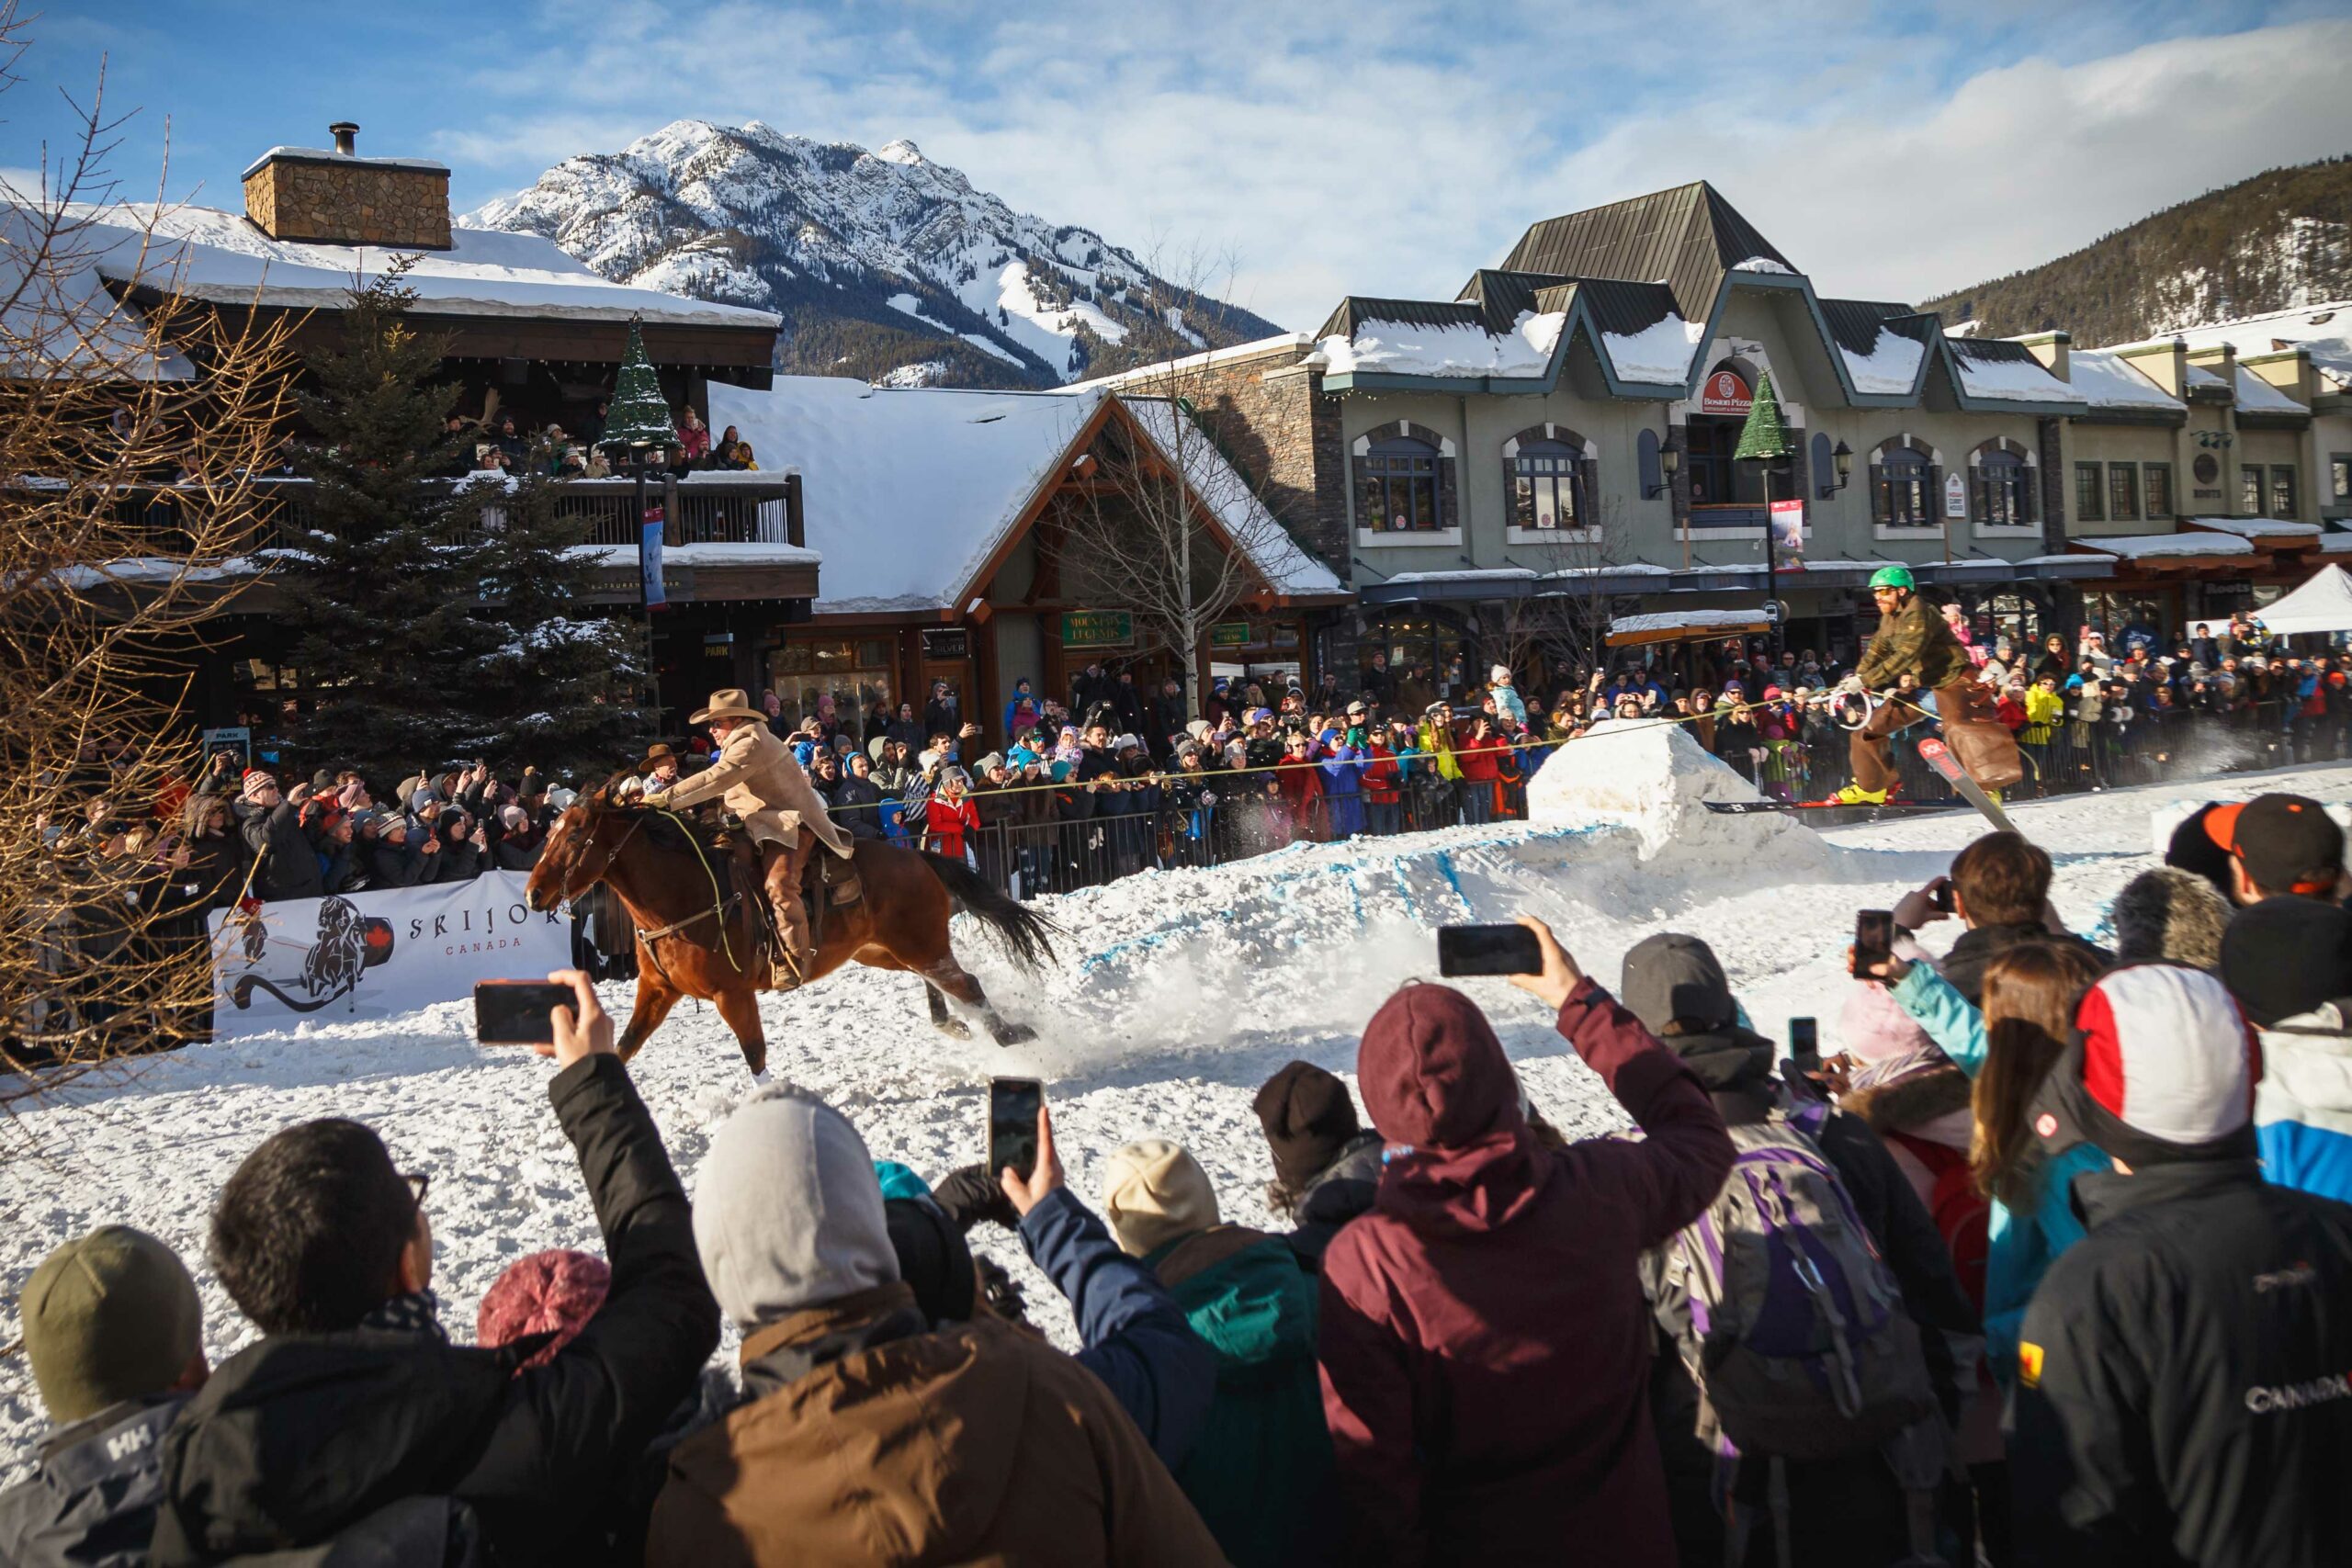 A horse gallops down Main Street in Banff pulling a trick skier in front of a crowd during SnowDays